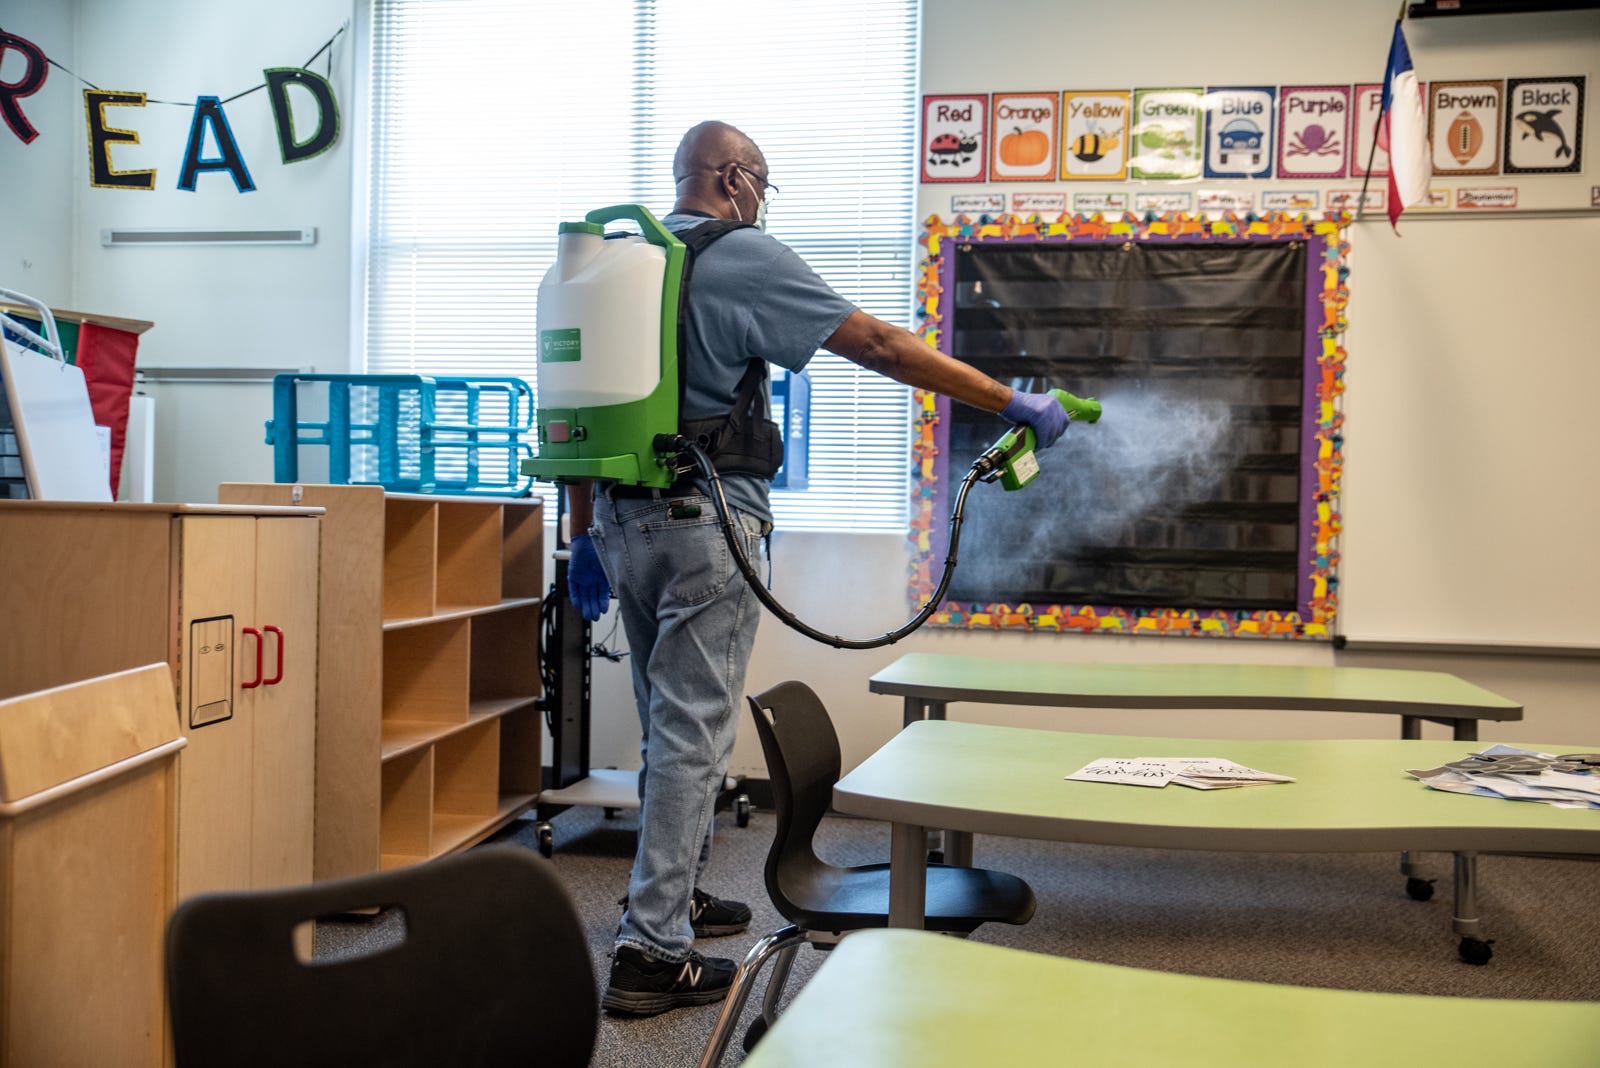 A custodian cleans a classroom at Akin Elementary in Leander, Texas on Thursday, July 16, 2020. The school has been preparing for possible return of students by cleaning and disinfecting classrooms to help prevent the spread of coronavirus. Sergio Flores for AMERICAN STATESMAN